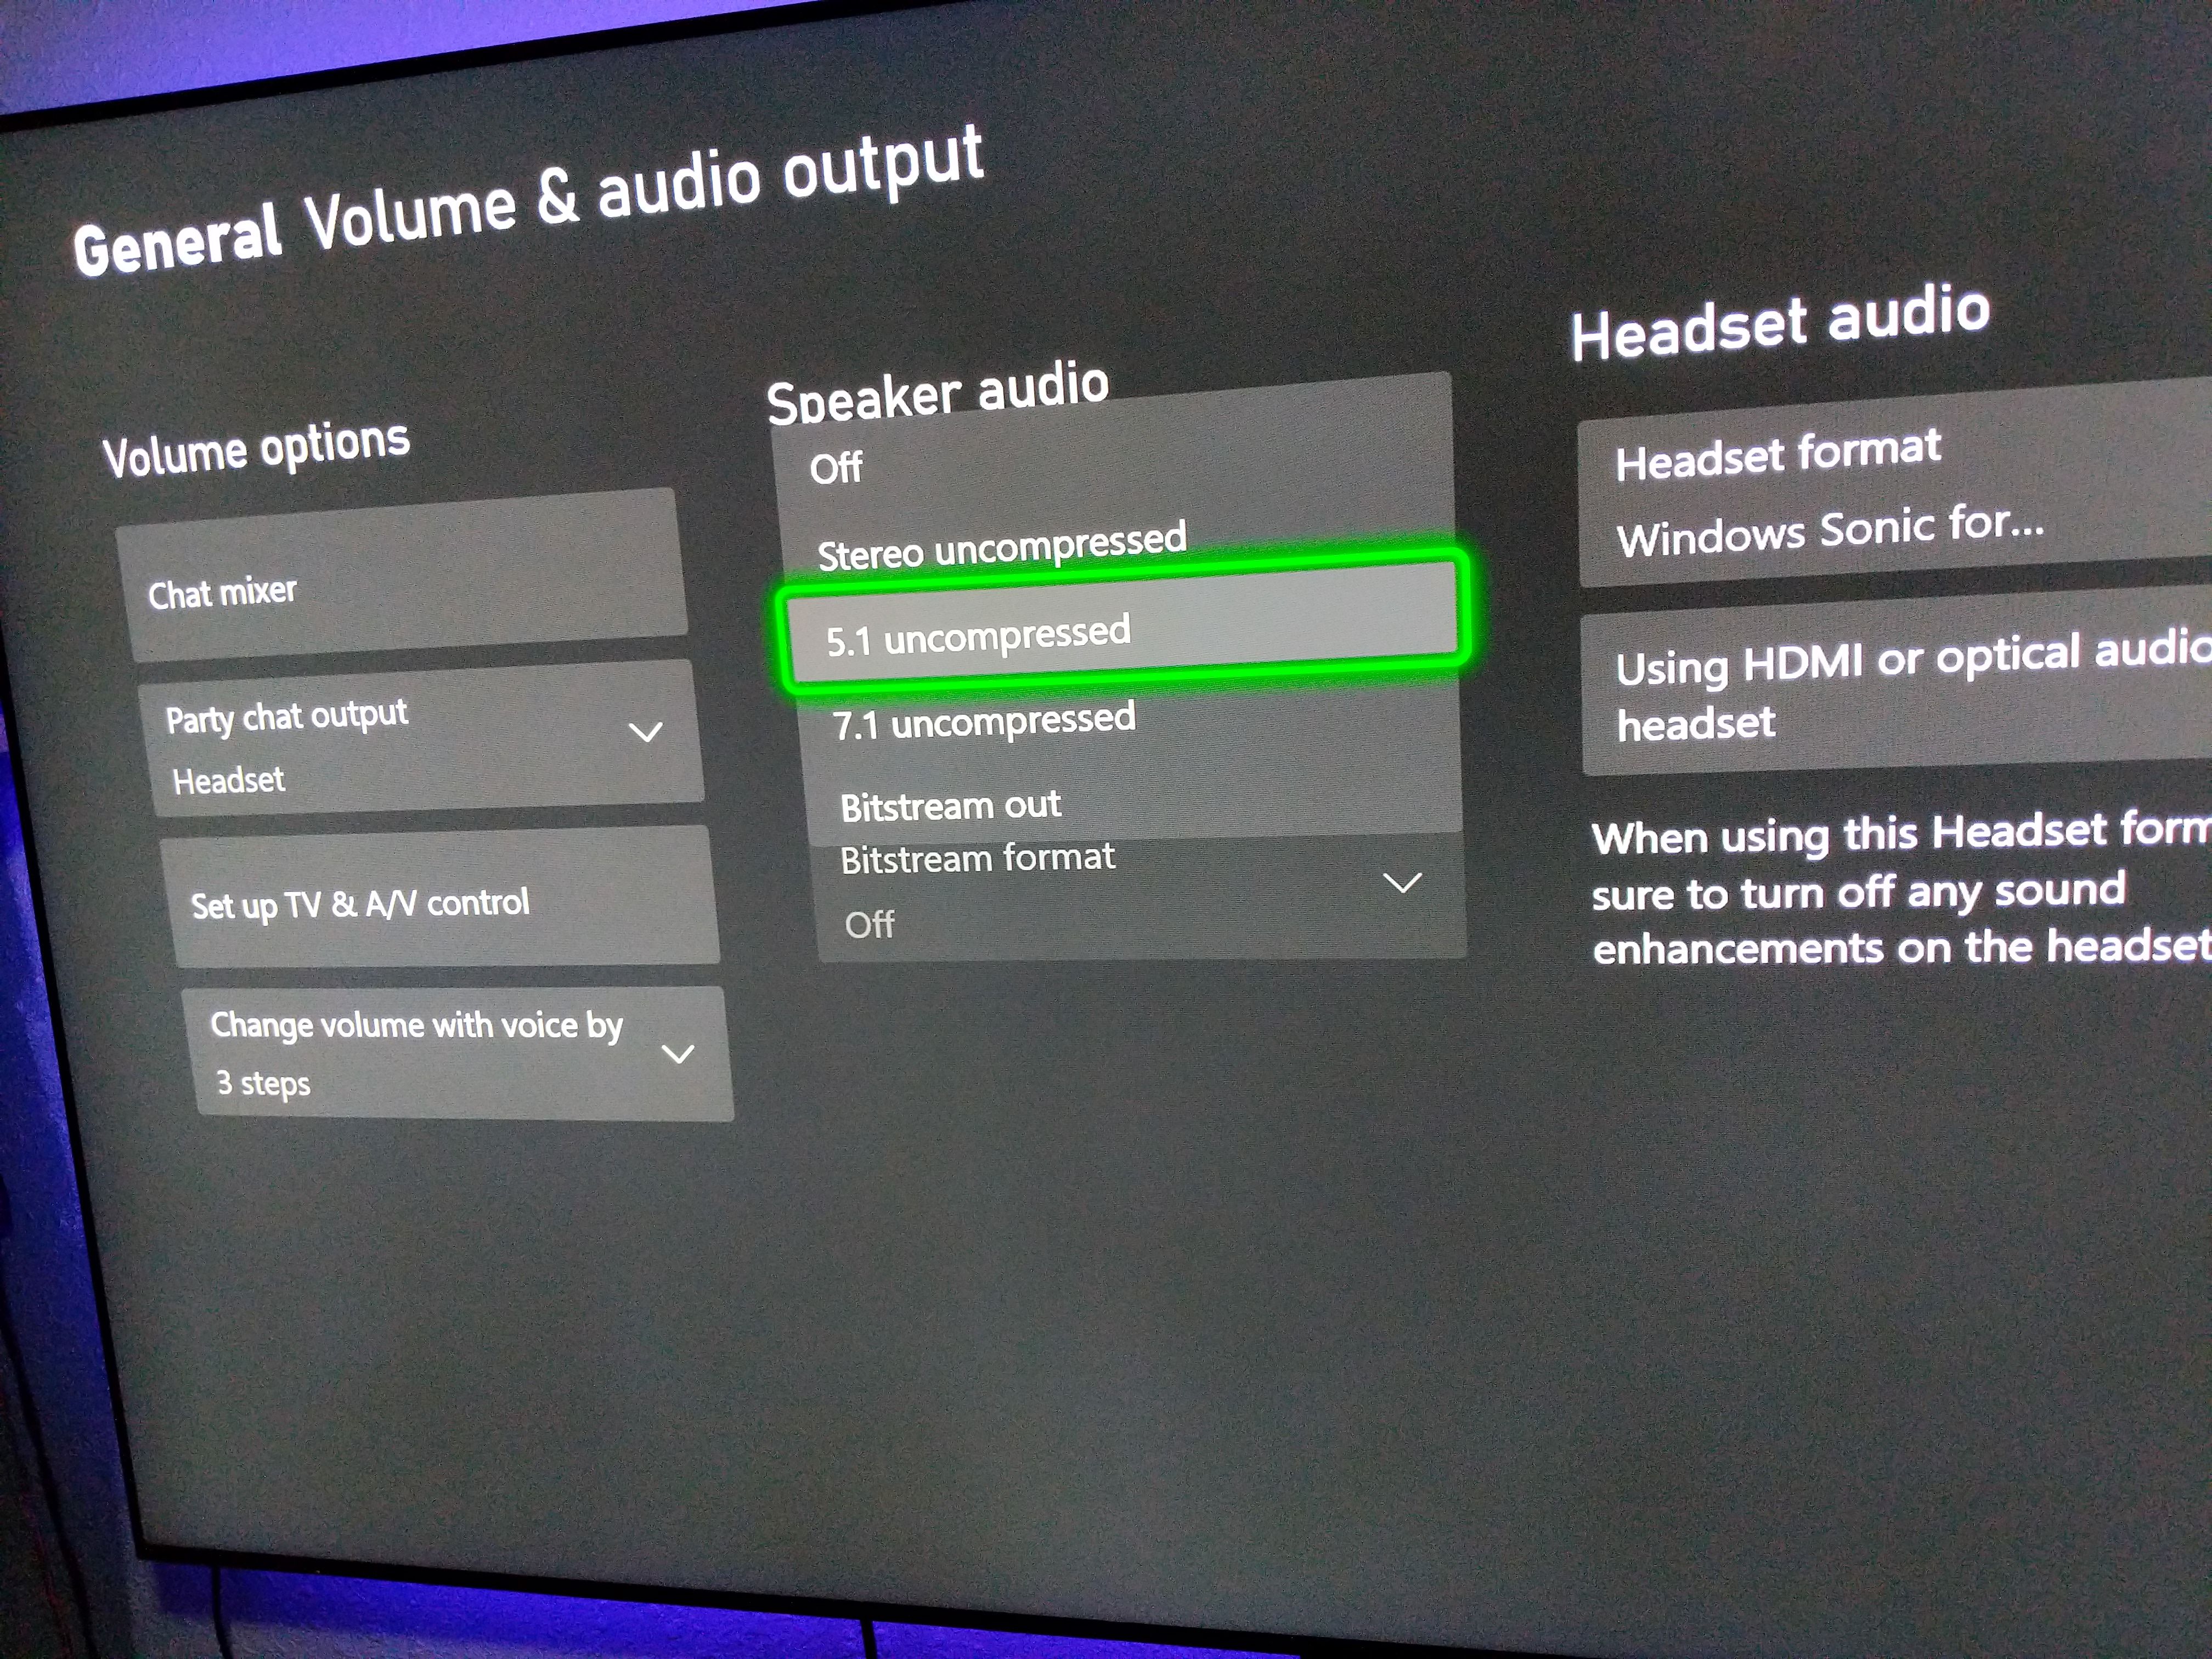 cultuur Afgekeurd Zorgvuldig lezen Uncompressed Audio over eArc needs to be patched for Q90 and Q80 TVs -  Please! - Samsung Community